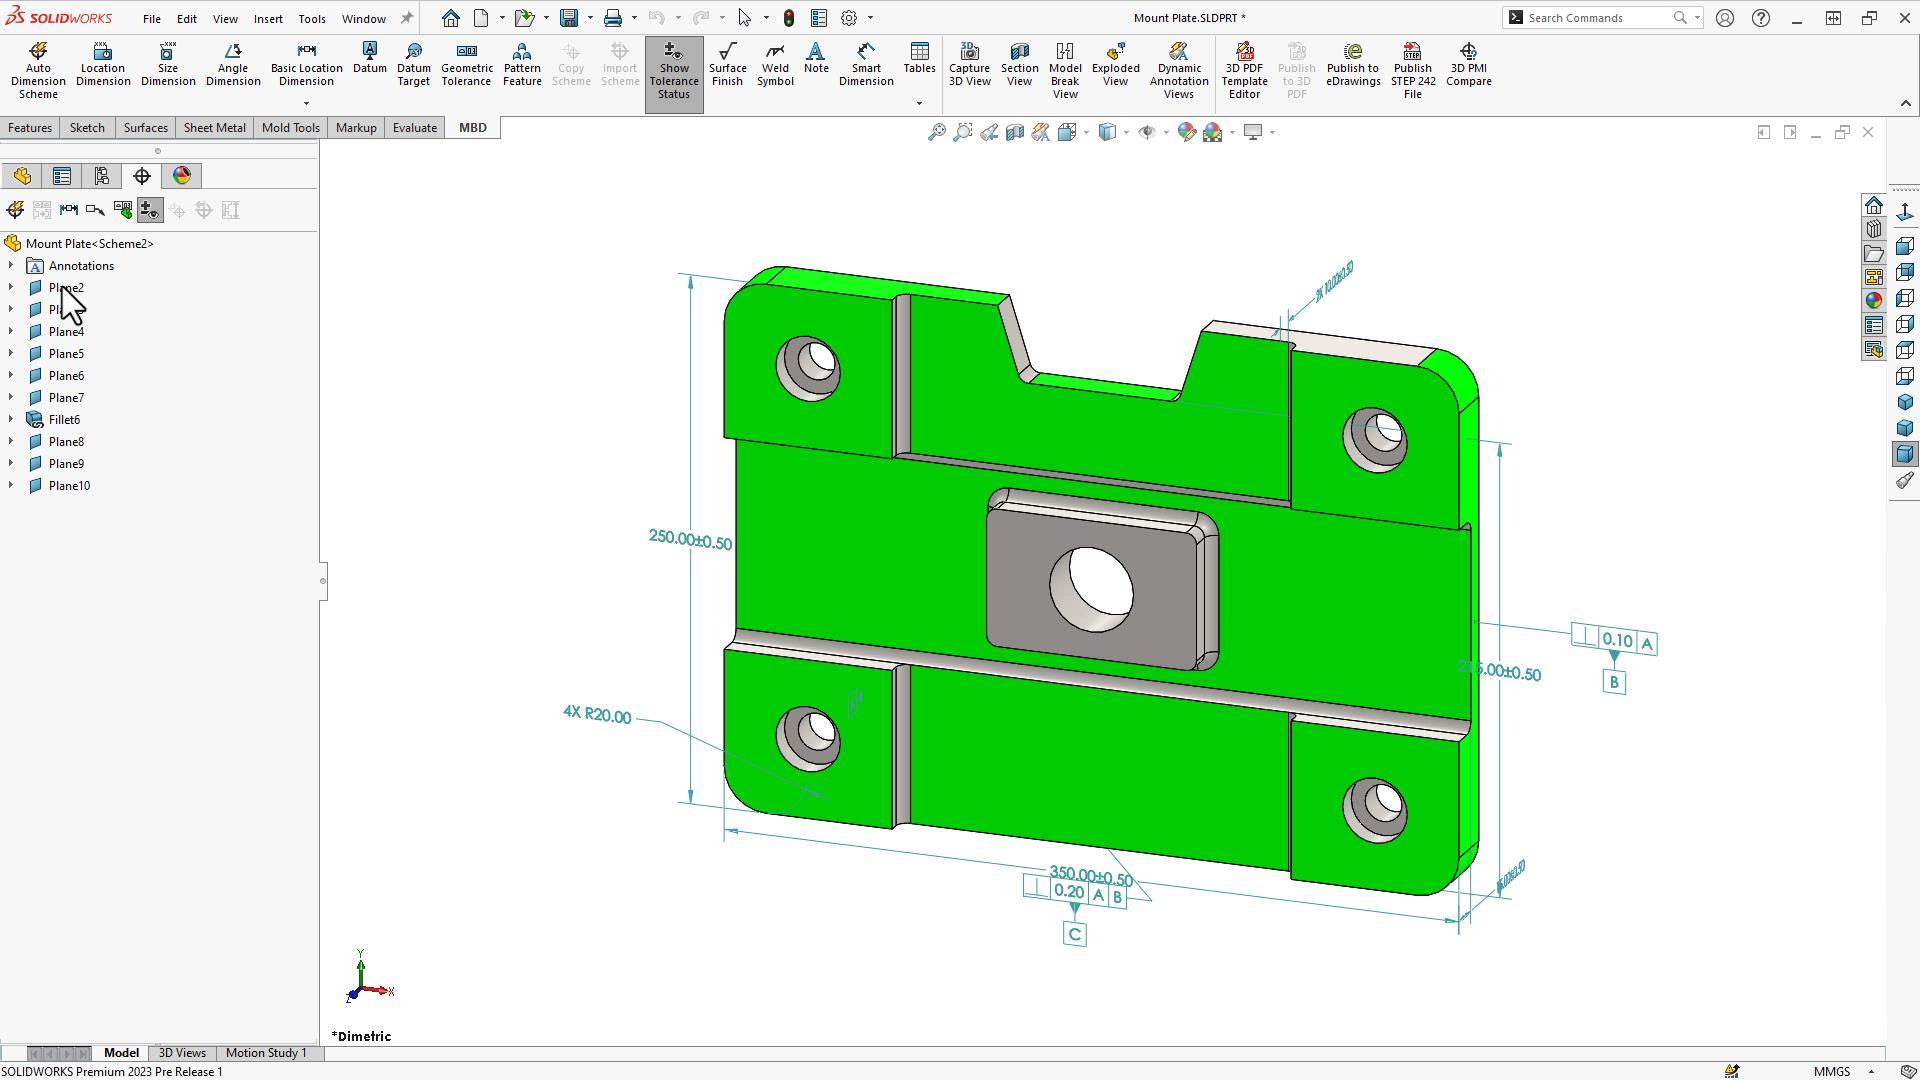 If you add a new face or feature to a model, SOLIDWORKS MBD does not automatically tolerance that face or feature.